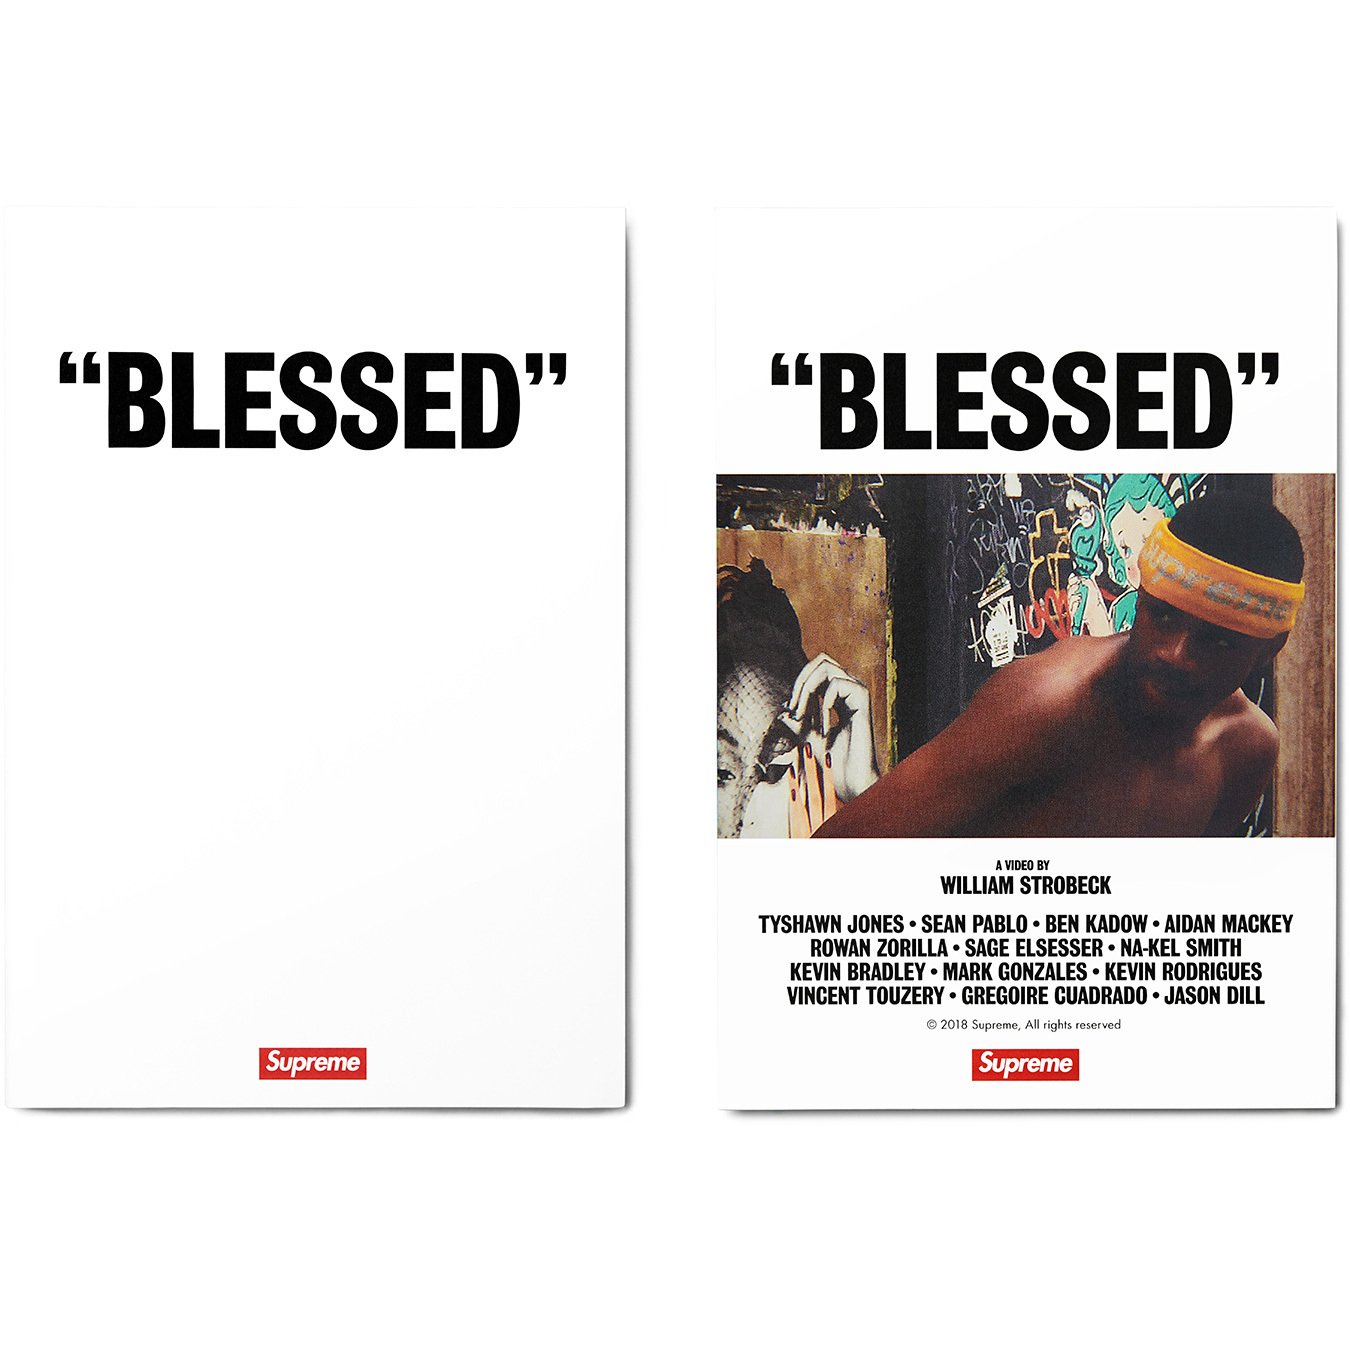 BLESSED” DVD - fall winter 2019 - Supreme